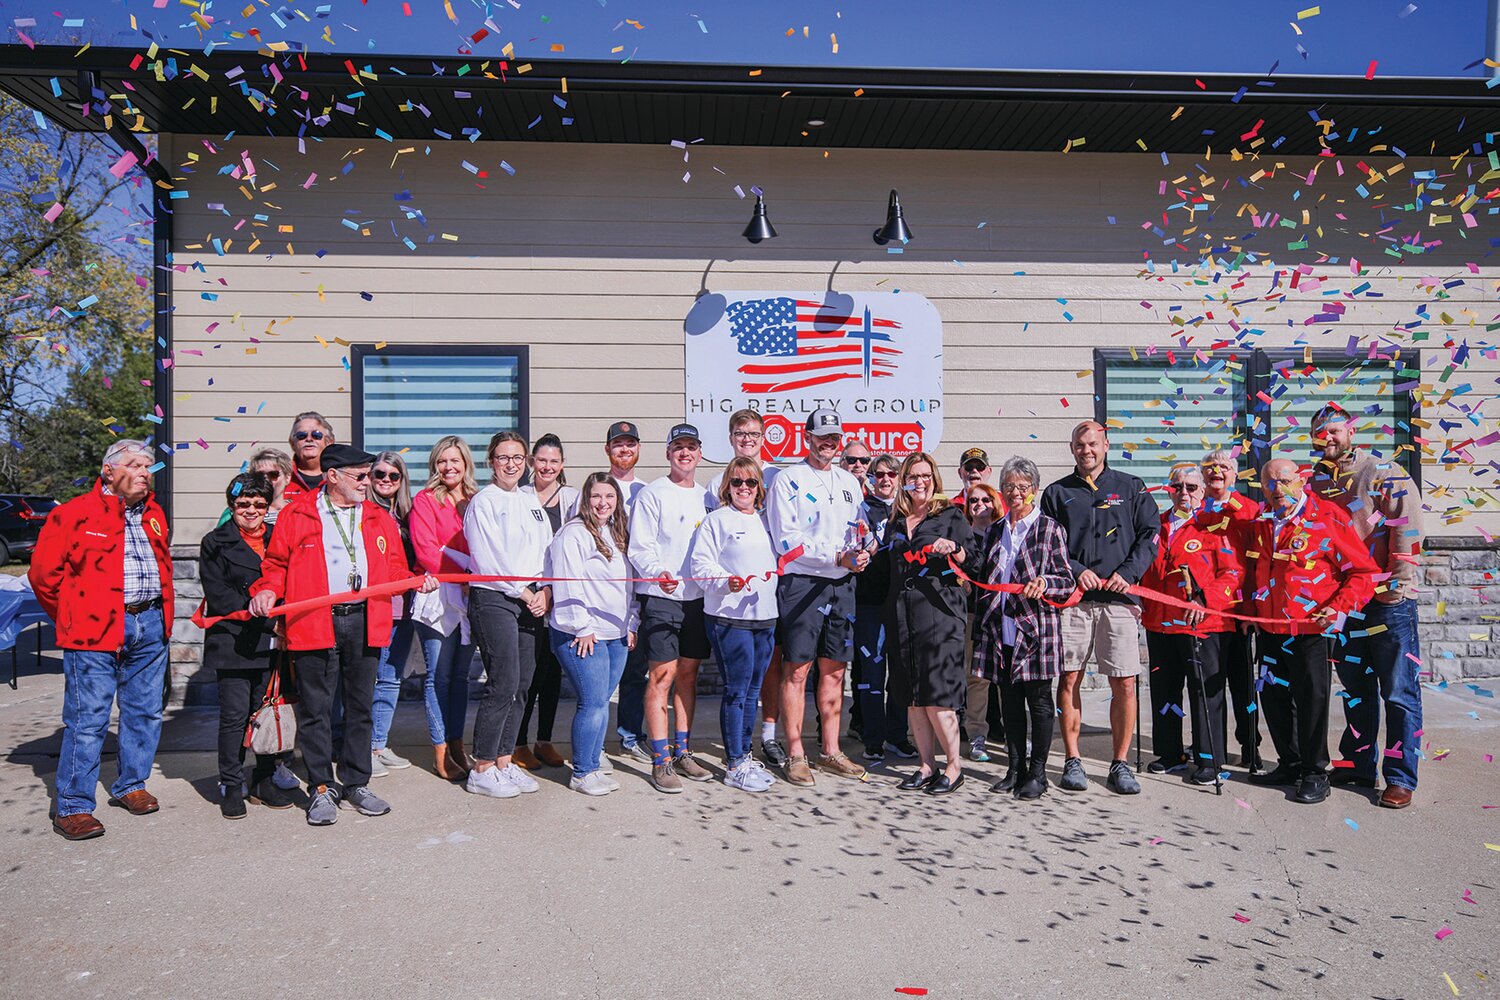 The Moberly Area Chamber of Commerce held a ribbon cutting Oct. 20 to celebrate the opening of HIG Realty. Submitted photo.